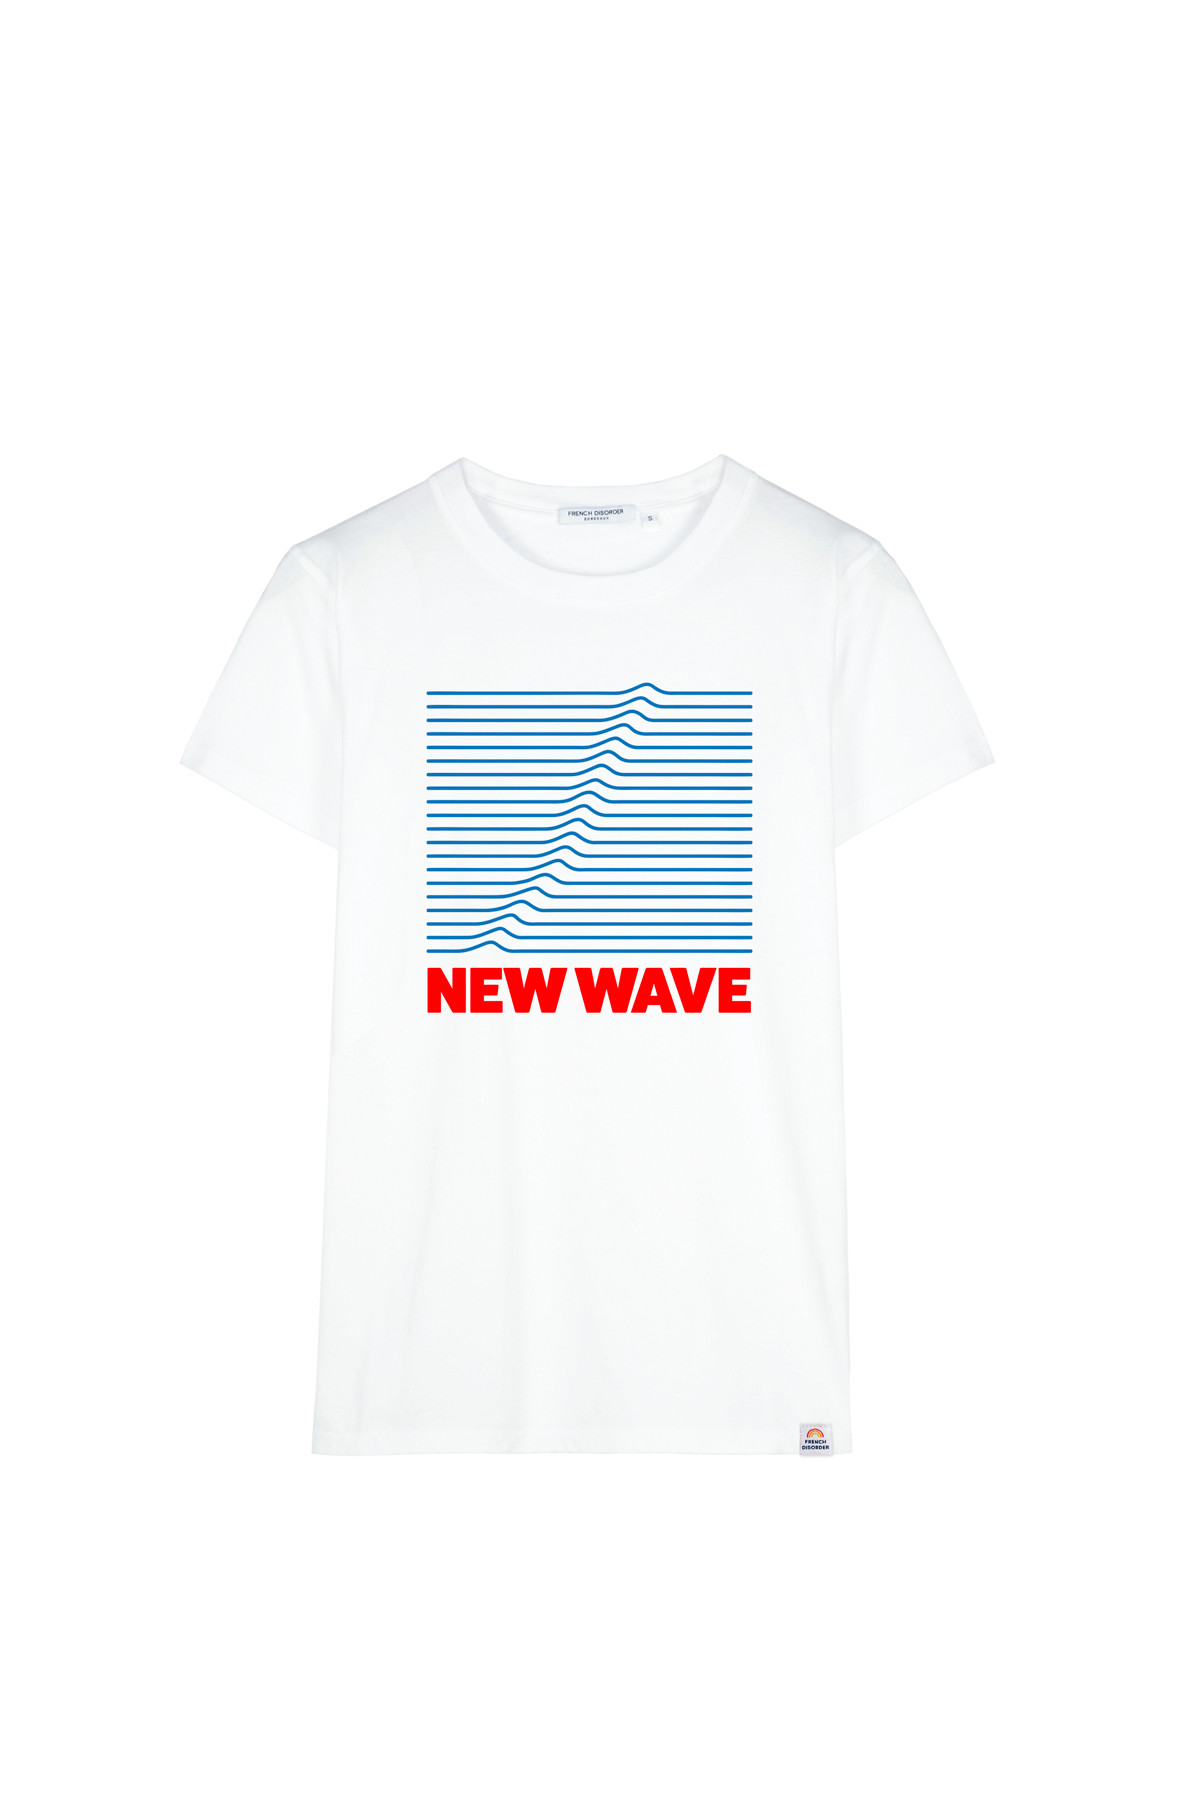 Photo de T-SHIRTS COL ROND Tshirt NEW WAVE chez French Disorder